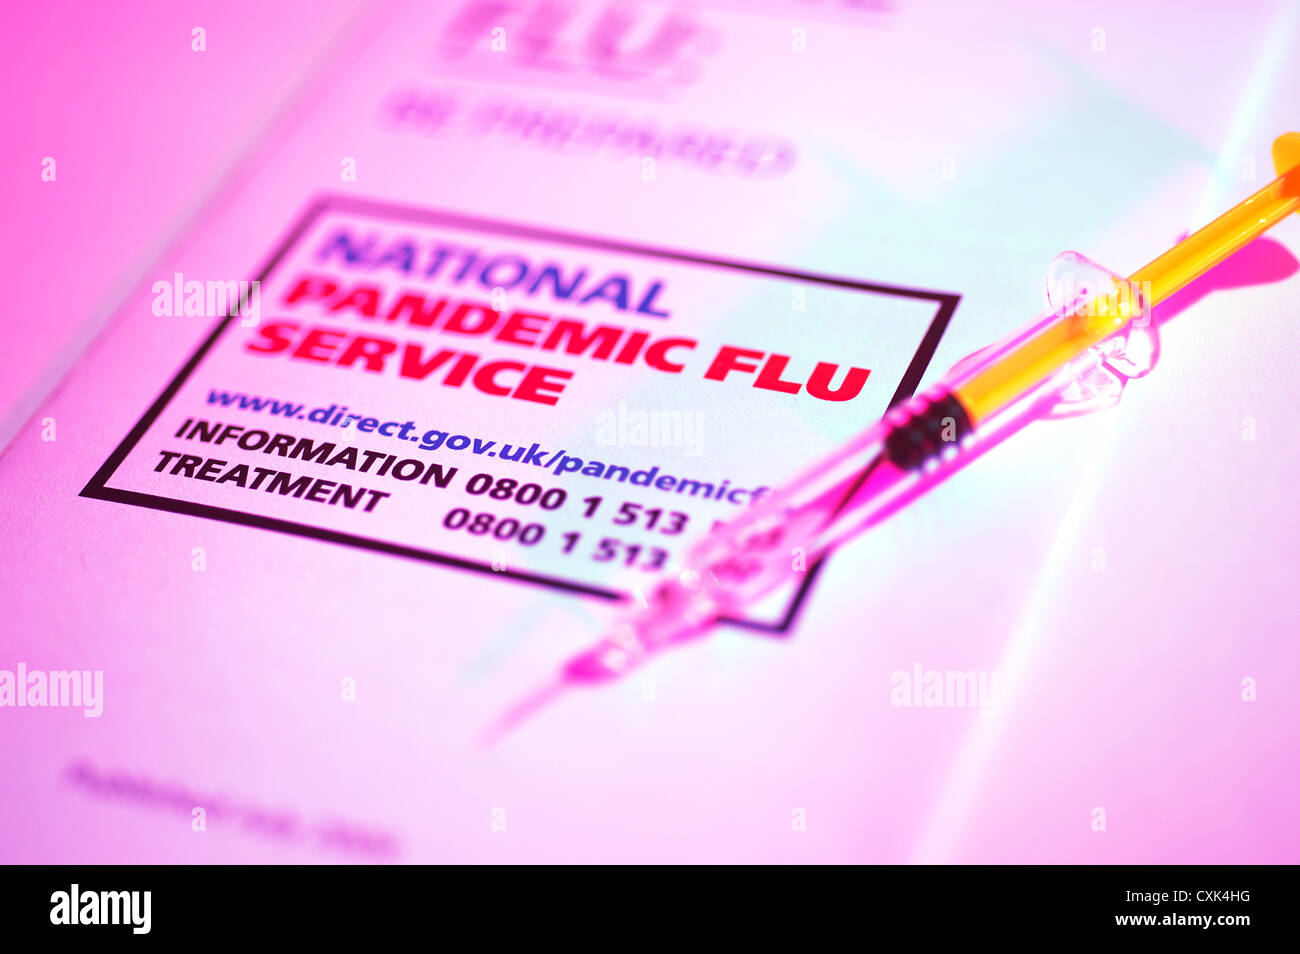 Swine Flu Be prepared National Pandemic Service UK government NHS leaflet with a needle and syringe of the flu vaccine Stock Photo